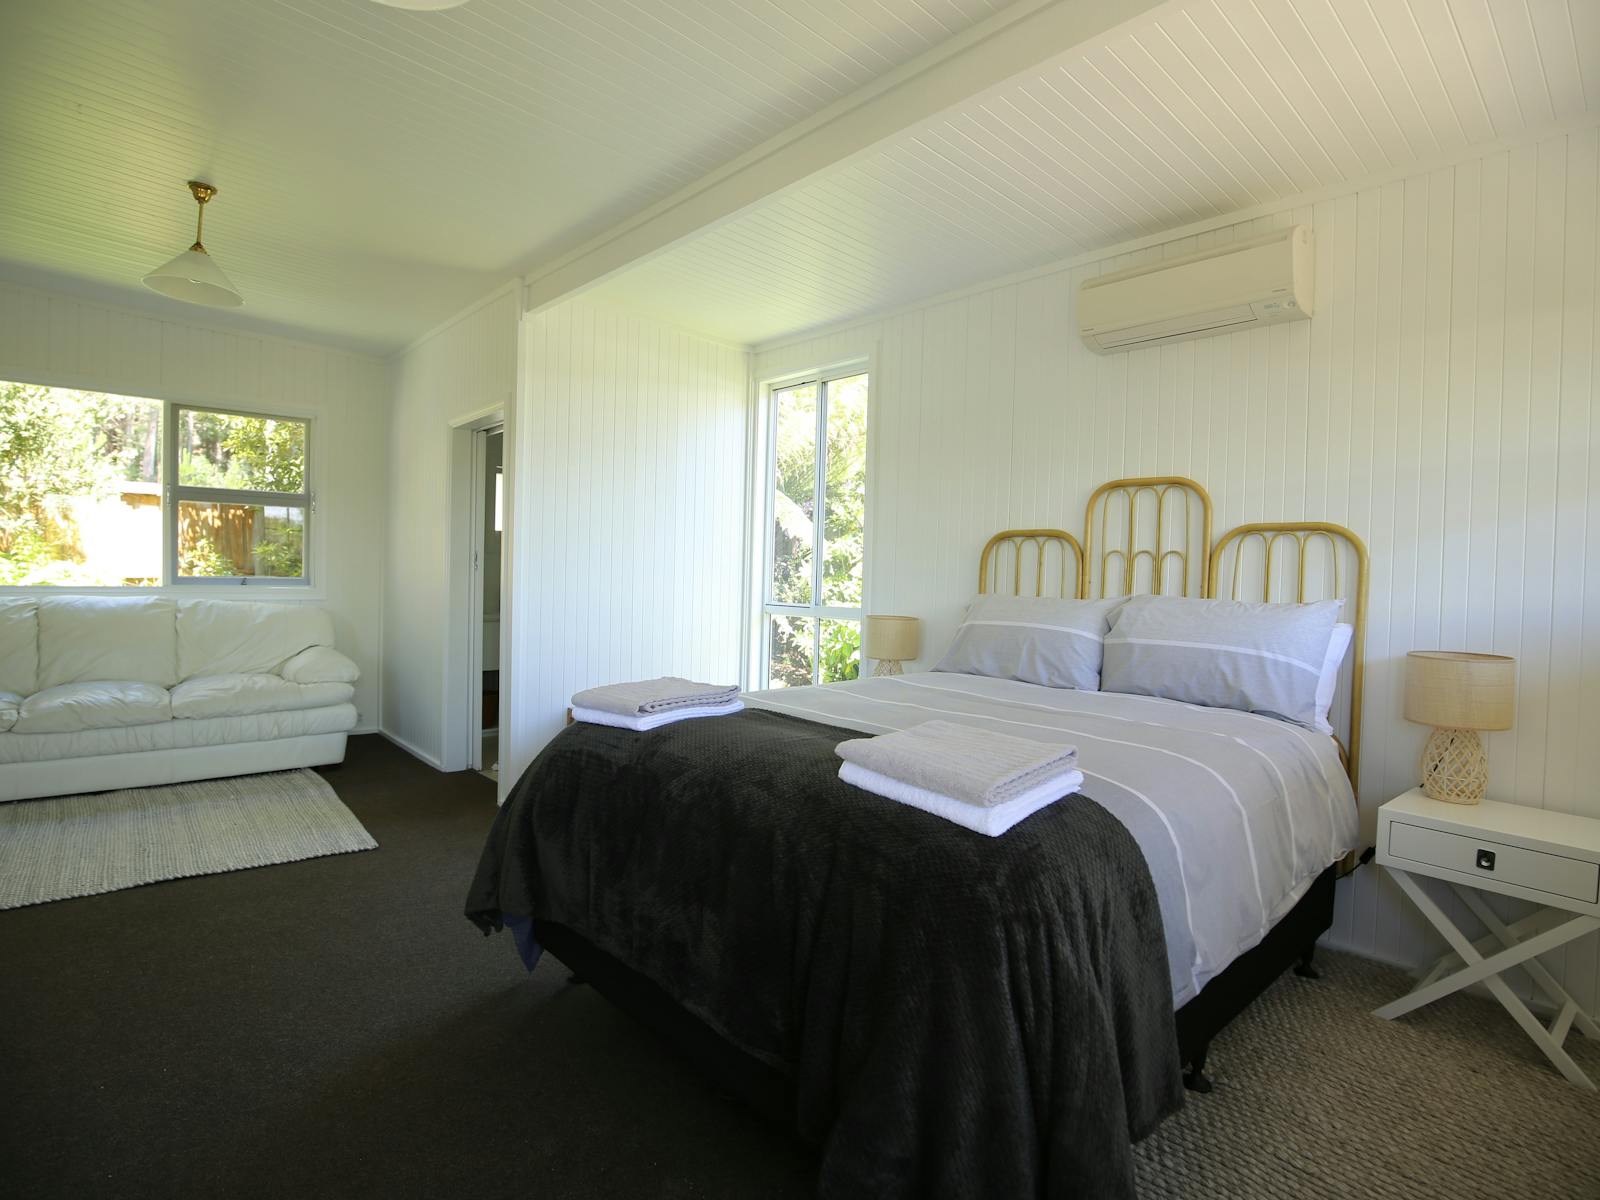 Picture of bedroom in cabin